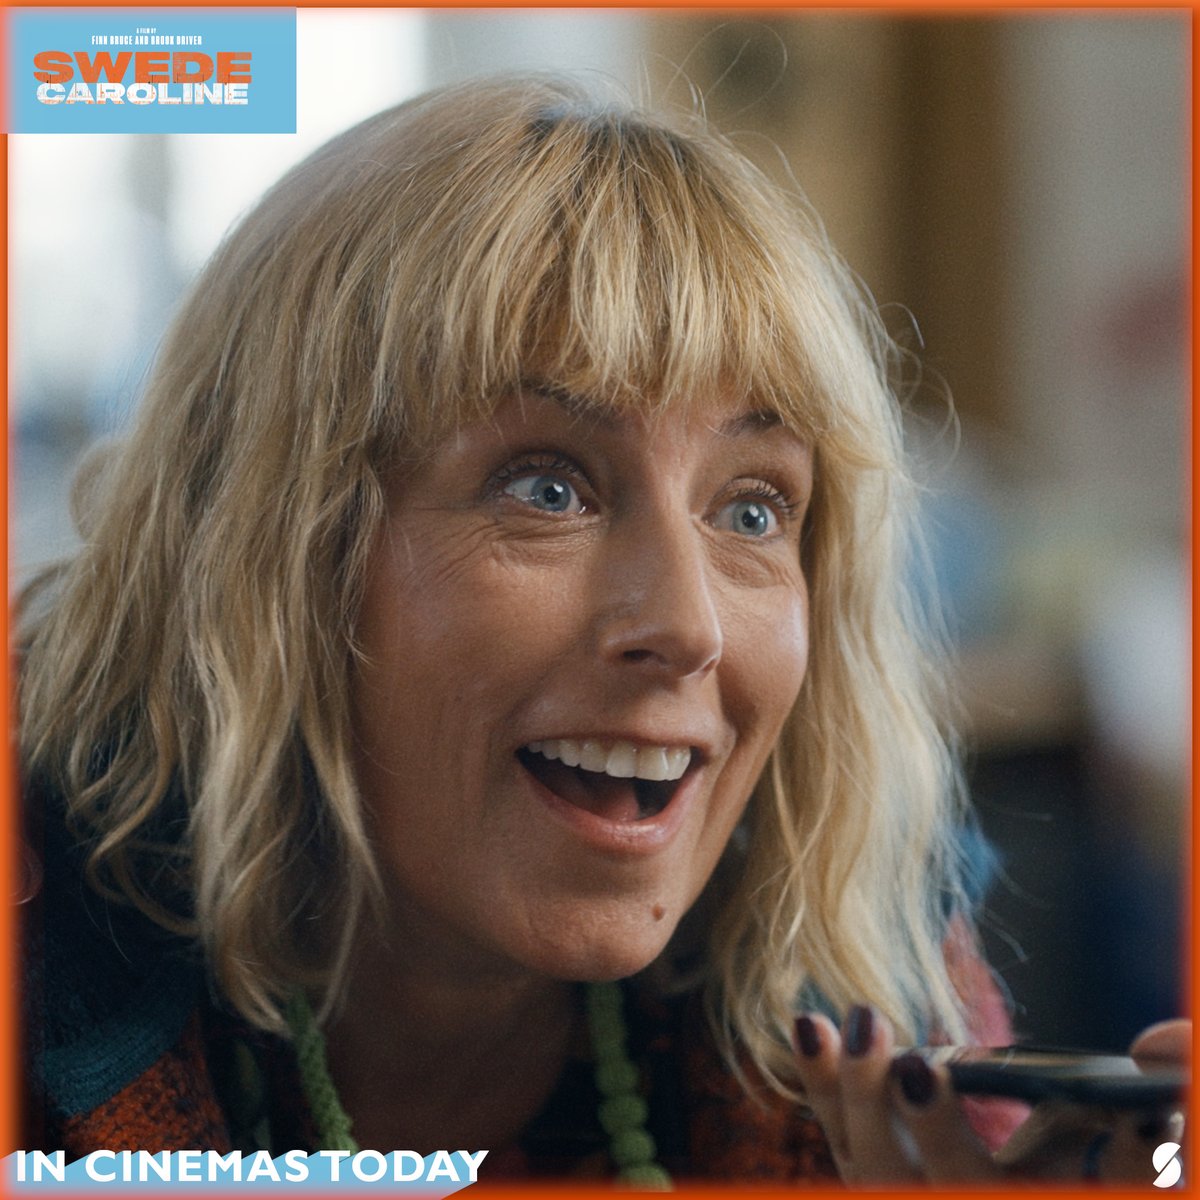 Tune into @thismorning in the next hour to catch the beloved Fay Ripley chatting about Swede Caroline which is in cinemas today!

#thismorning #indiefilm #cinema #comedy #british #swedecaroline